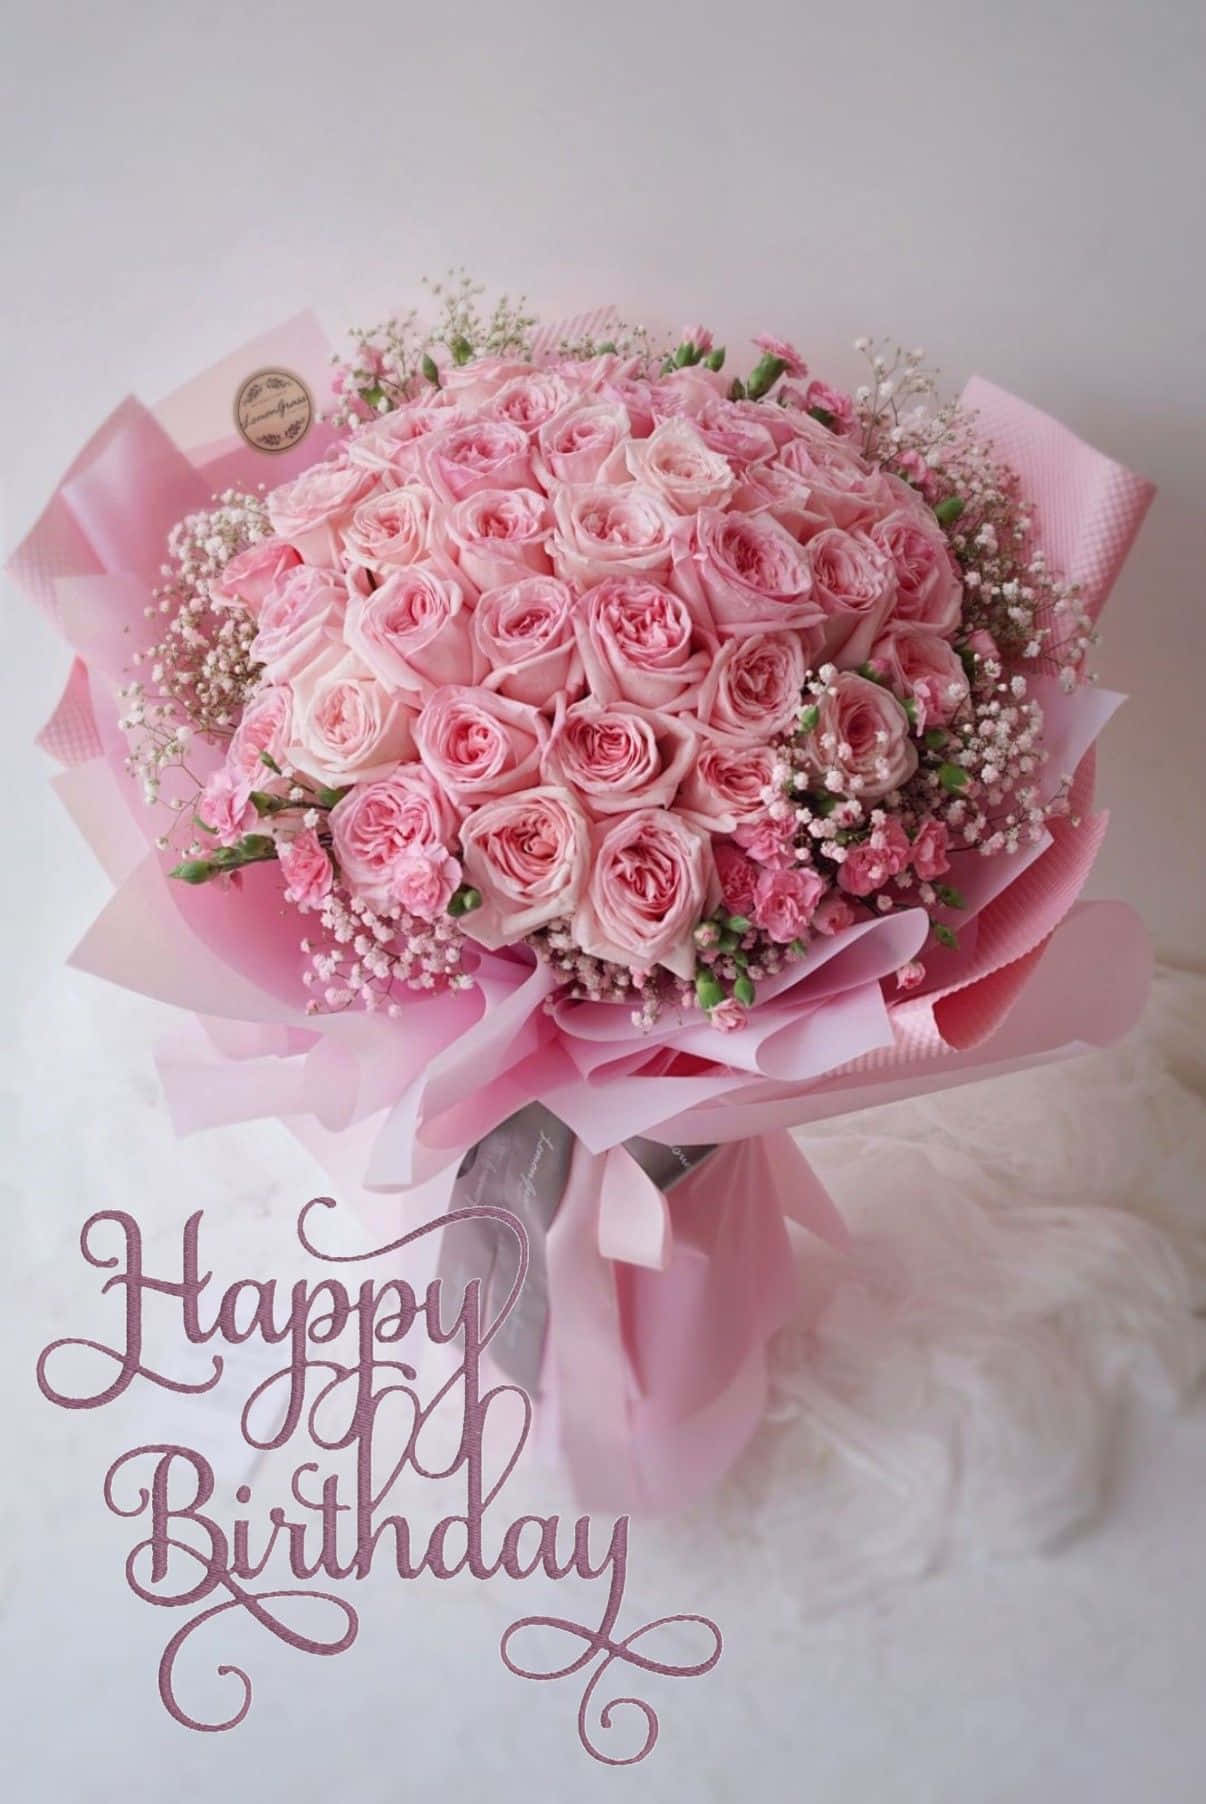 Birthday Message With Pink Flower Picture